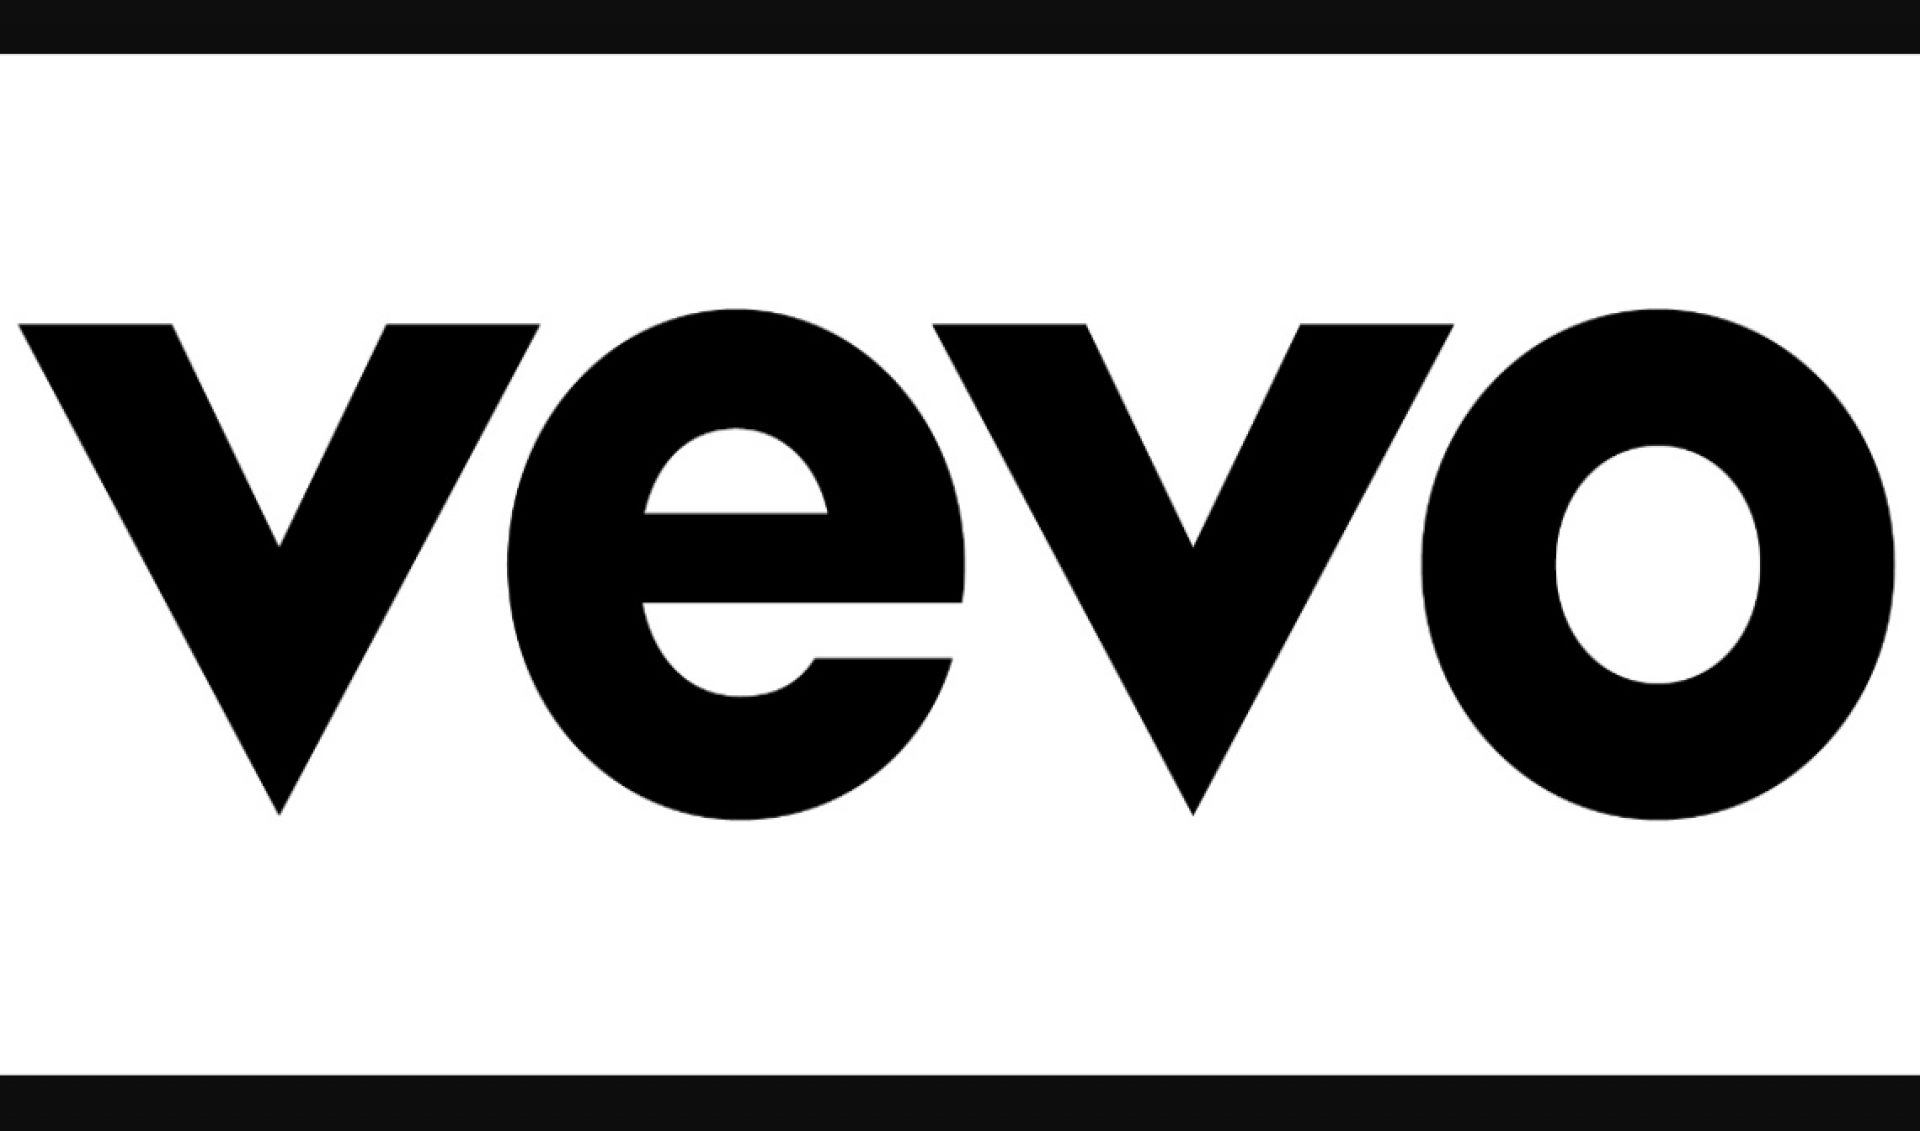 Vevo Announces Layoffs After The Departure Of Its CTO